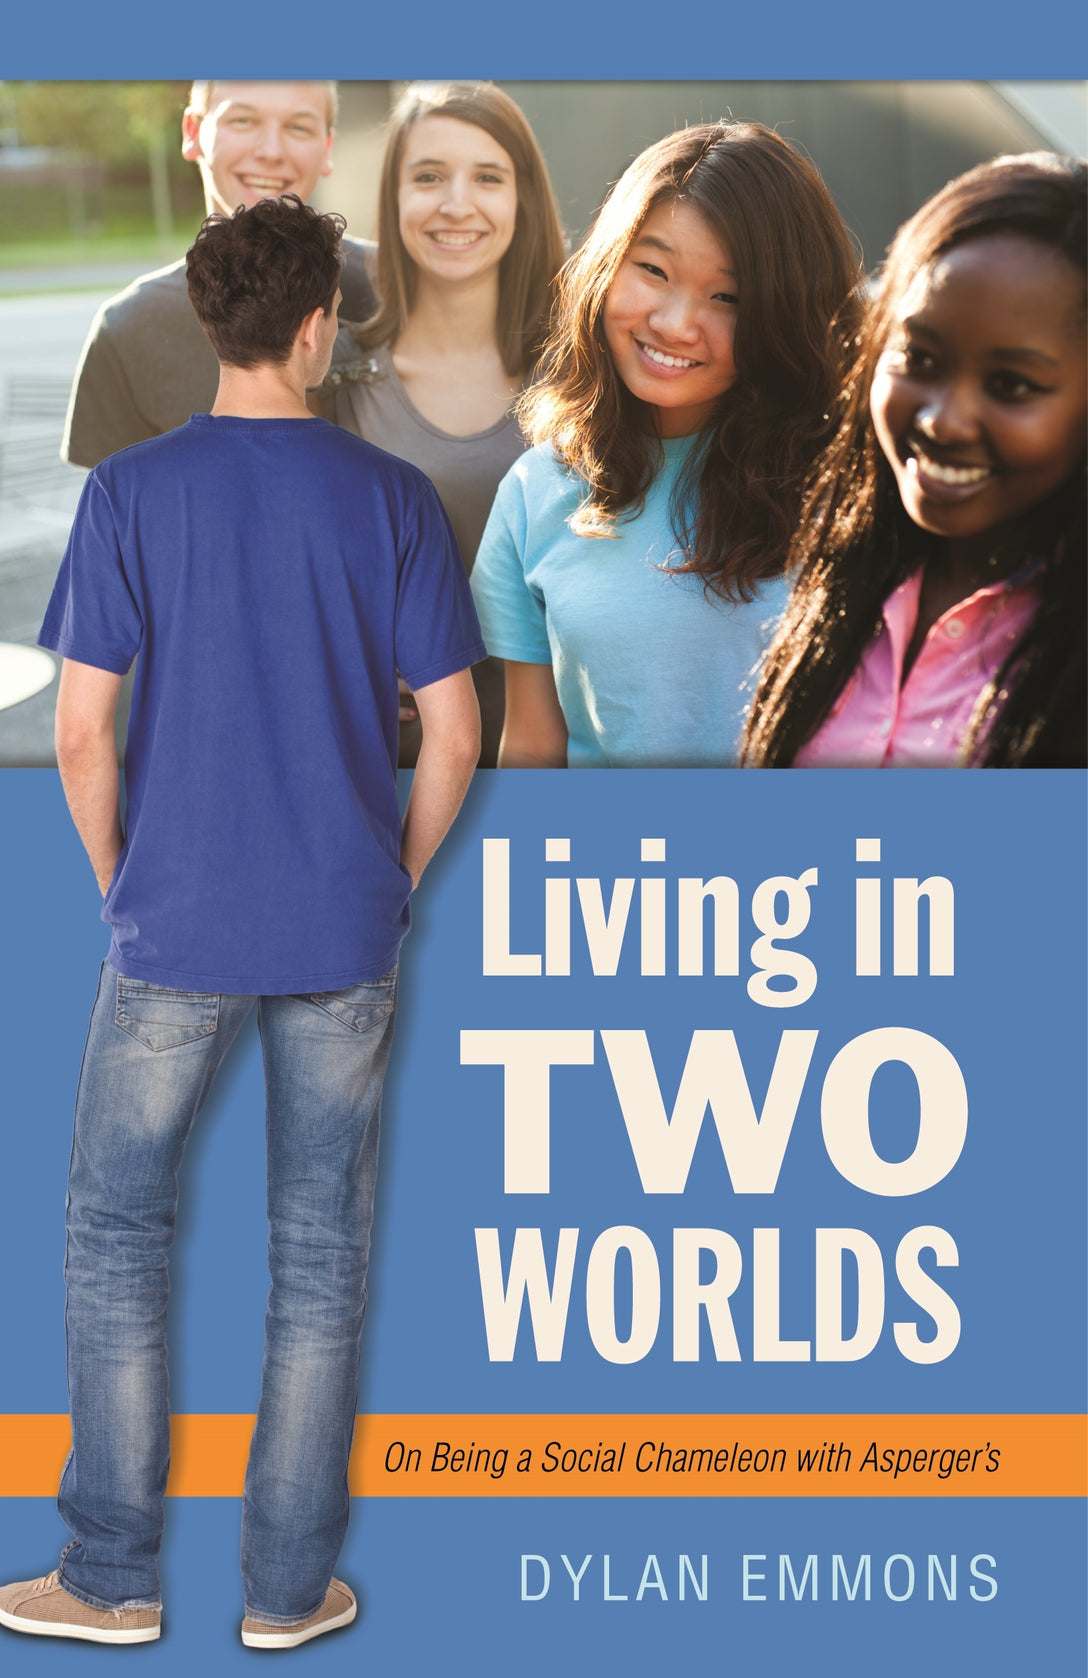 Living in Two Worlds by Dylan Emmons